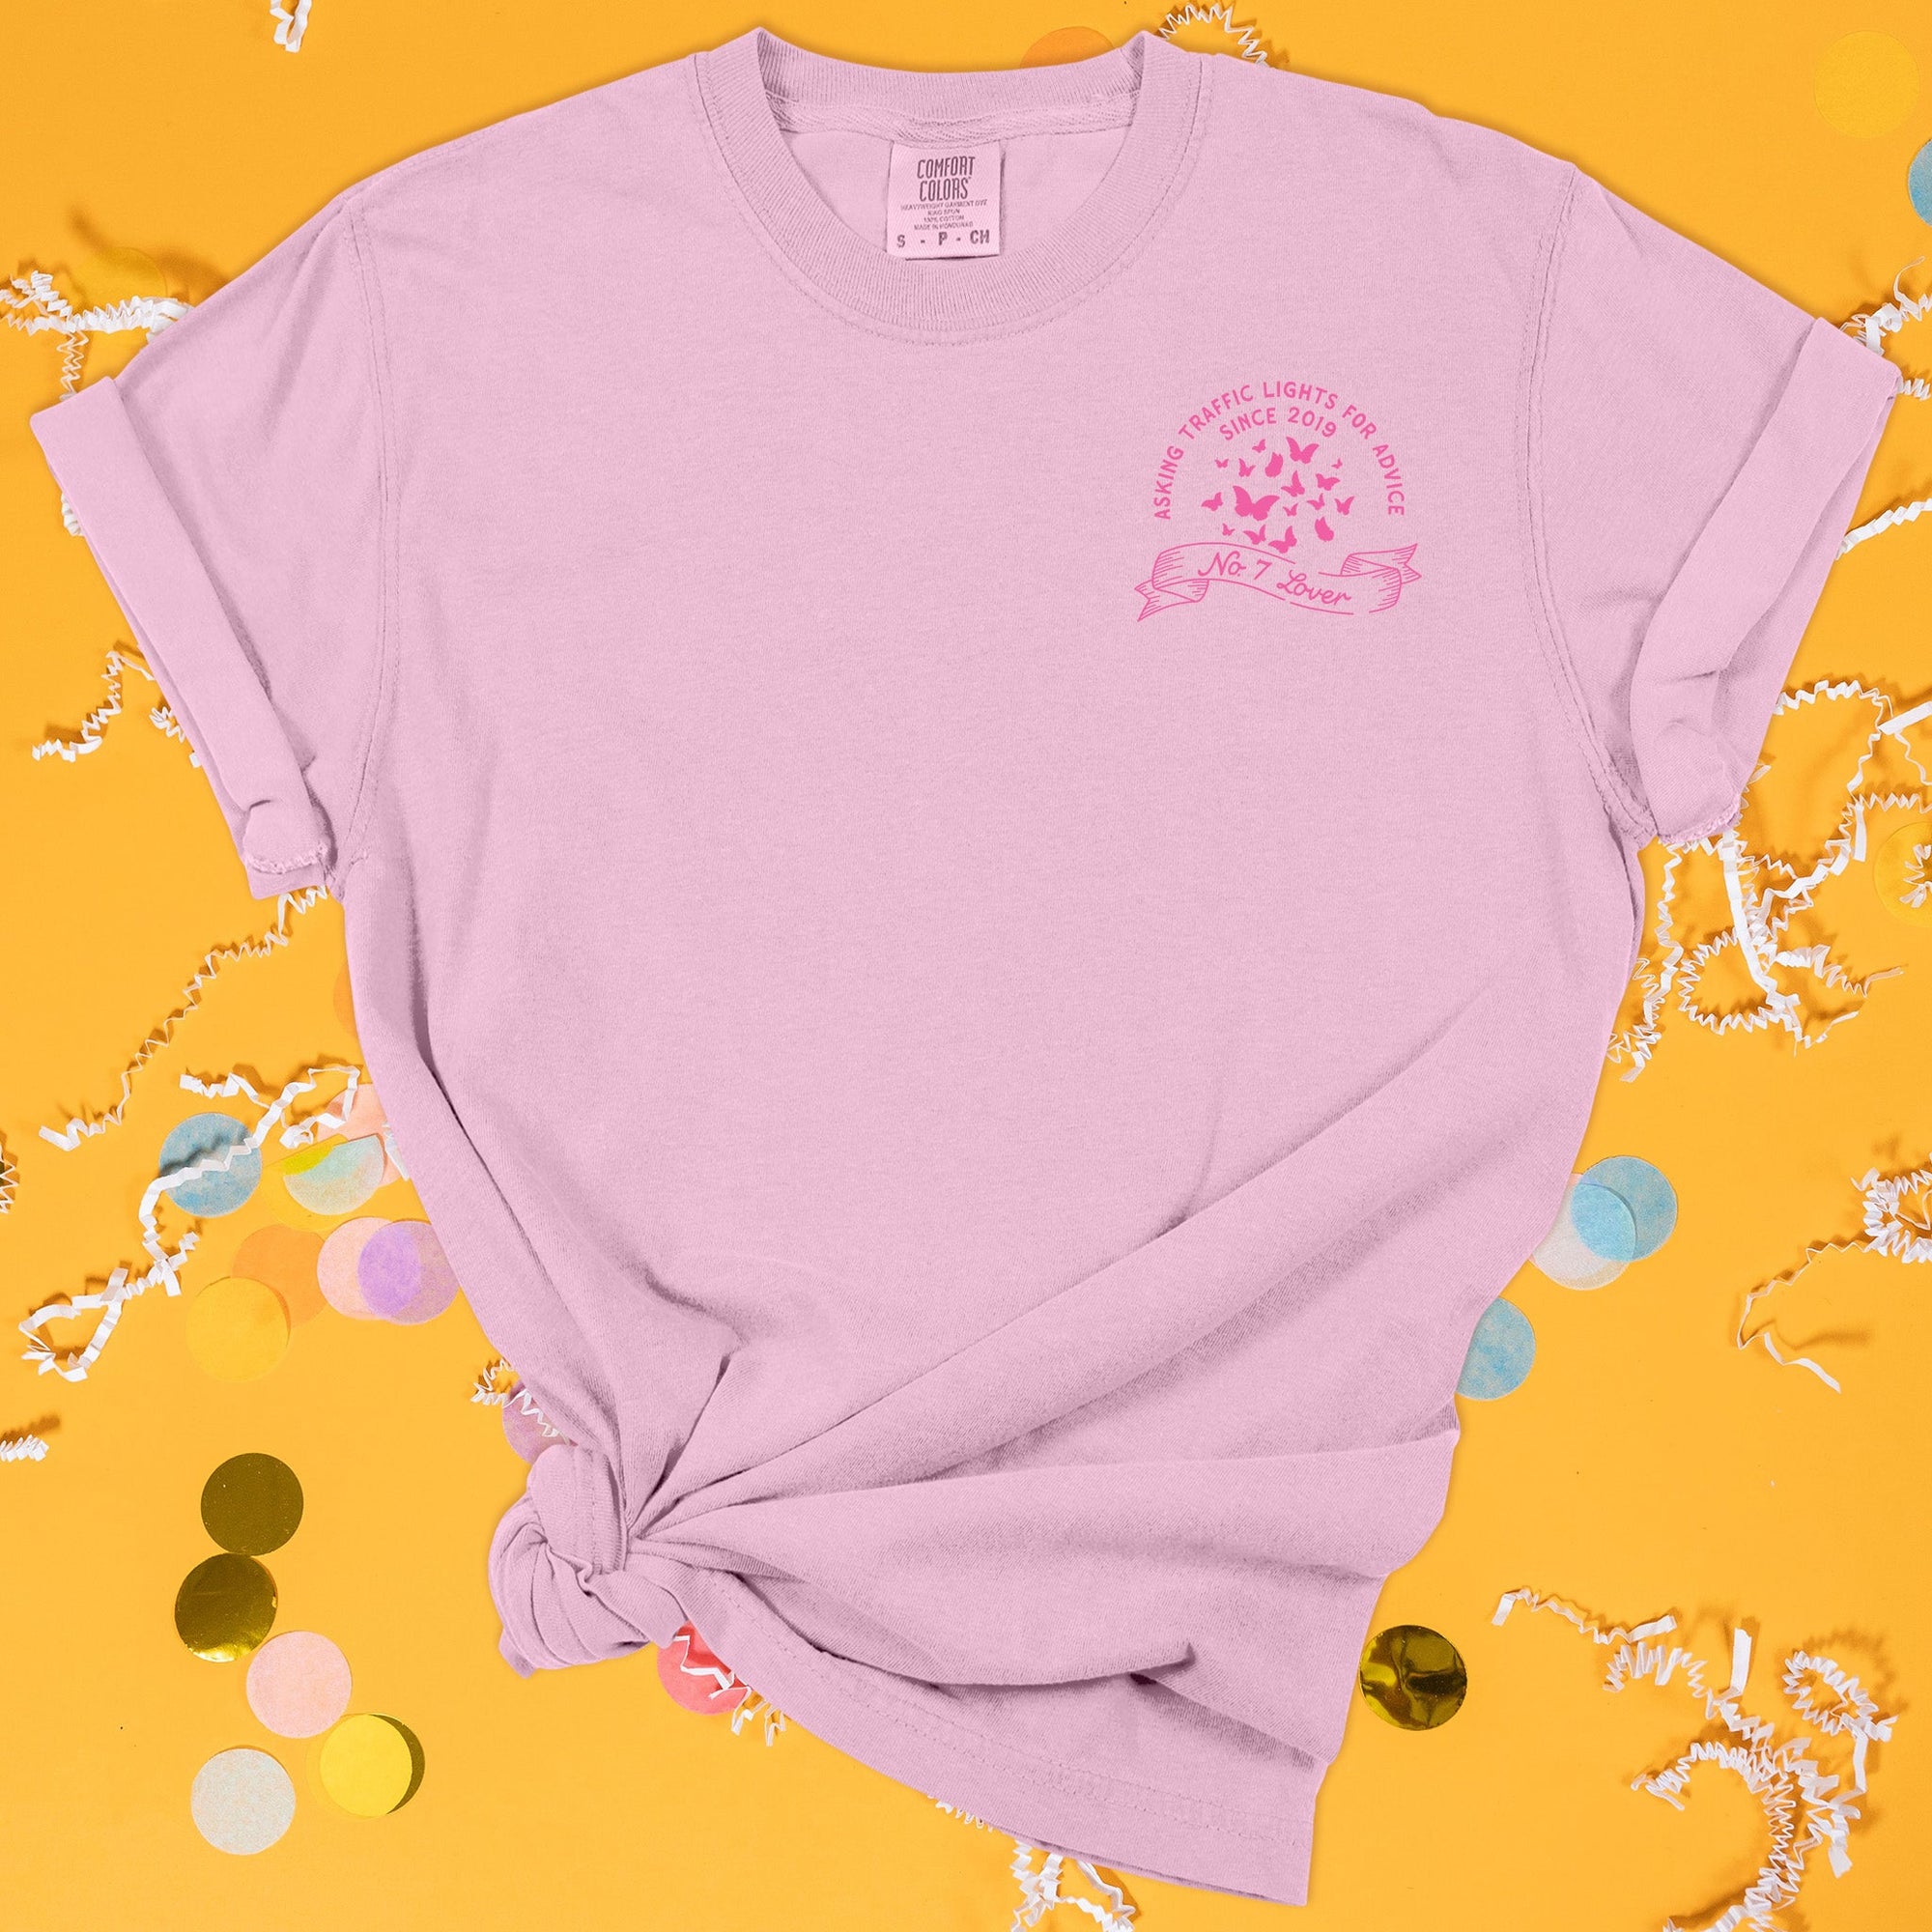 On a sunny mustard background sits the front of a t-shirt with white crinkle and big, colorful confetti scattered around. This Taylor Swift Inspired Reputation tee is pink with bubblegum lettering and illustrations. There are butterflies with a ribbon under it over the left chest area. It says "ASKING TRAFFIC LIGHTS FOR ADVICE SINCE 2019" in all caps and "No. 7 Lover" in script lettering.